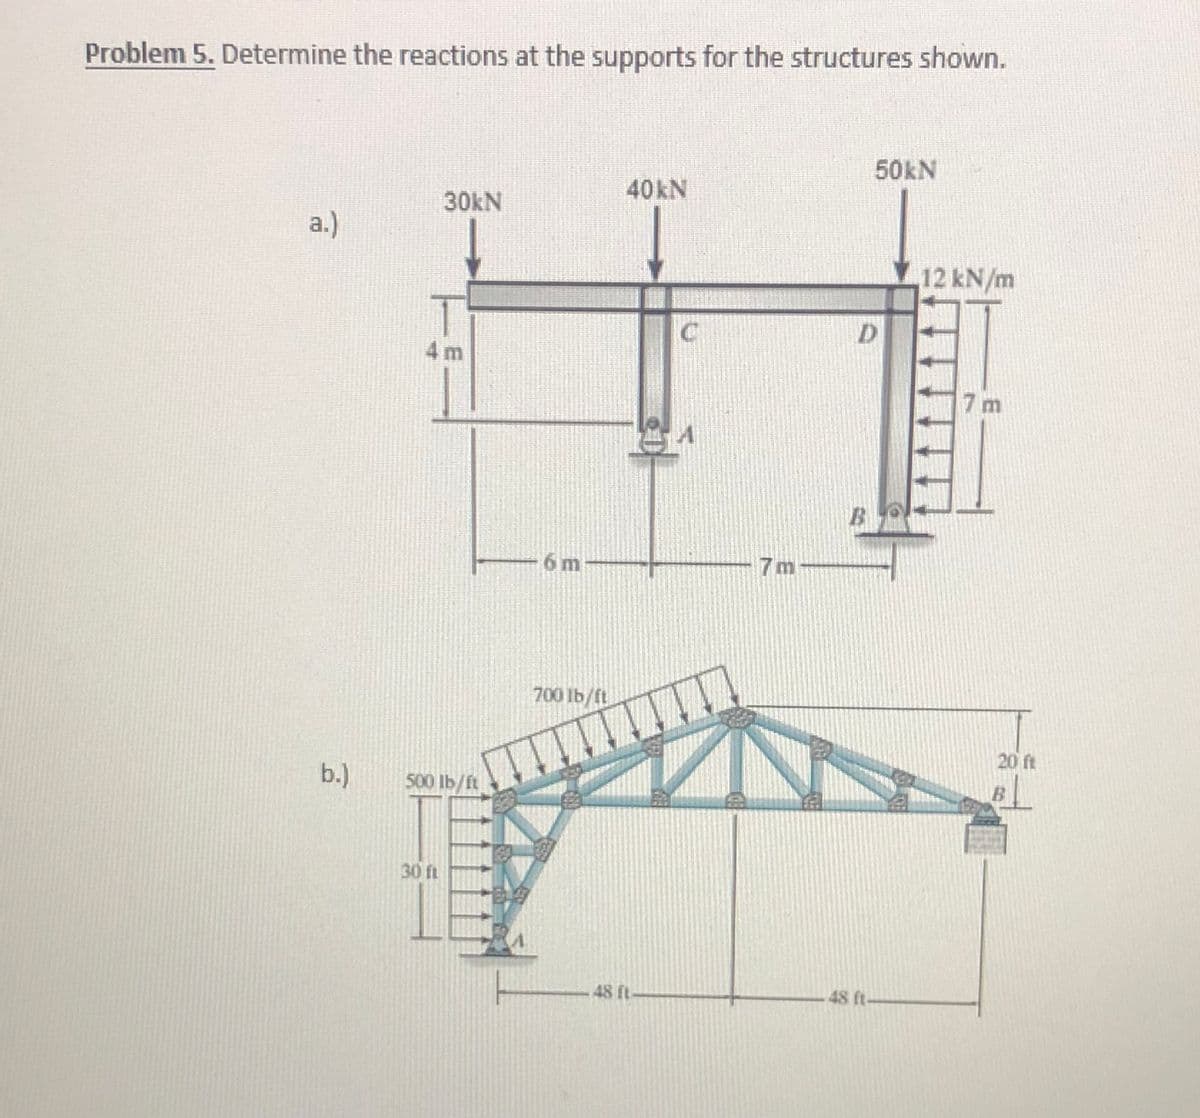 Problem 5. Determine the reactions at the supports for the structures shown.
50KN
40KN
30KN
a.)
12 kN/m
D.
4 m
7 m
6m
7m
700 lb/ft
20 ft
b.)
500 lb/ft
30 ft
48 ft-
48 ft-
